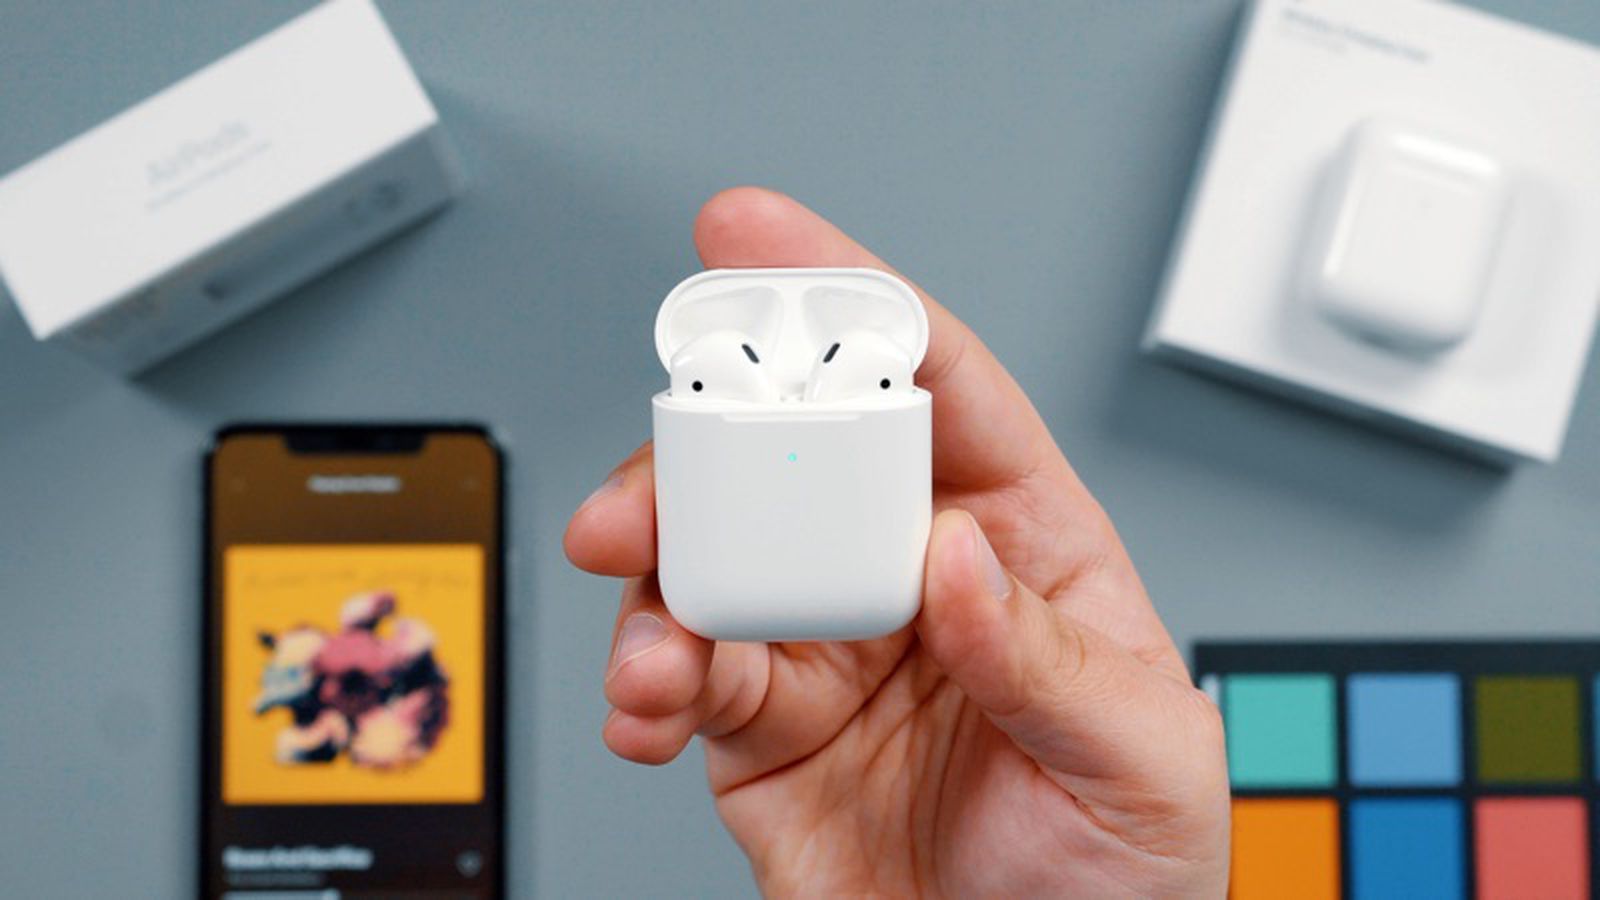 Deals Spotlight: AirPods With Charging Case Discounted to $145